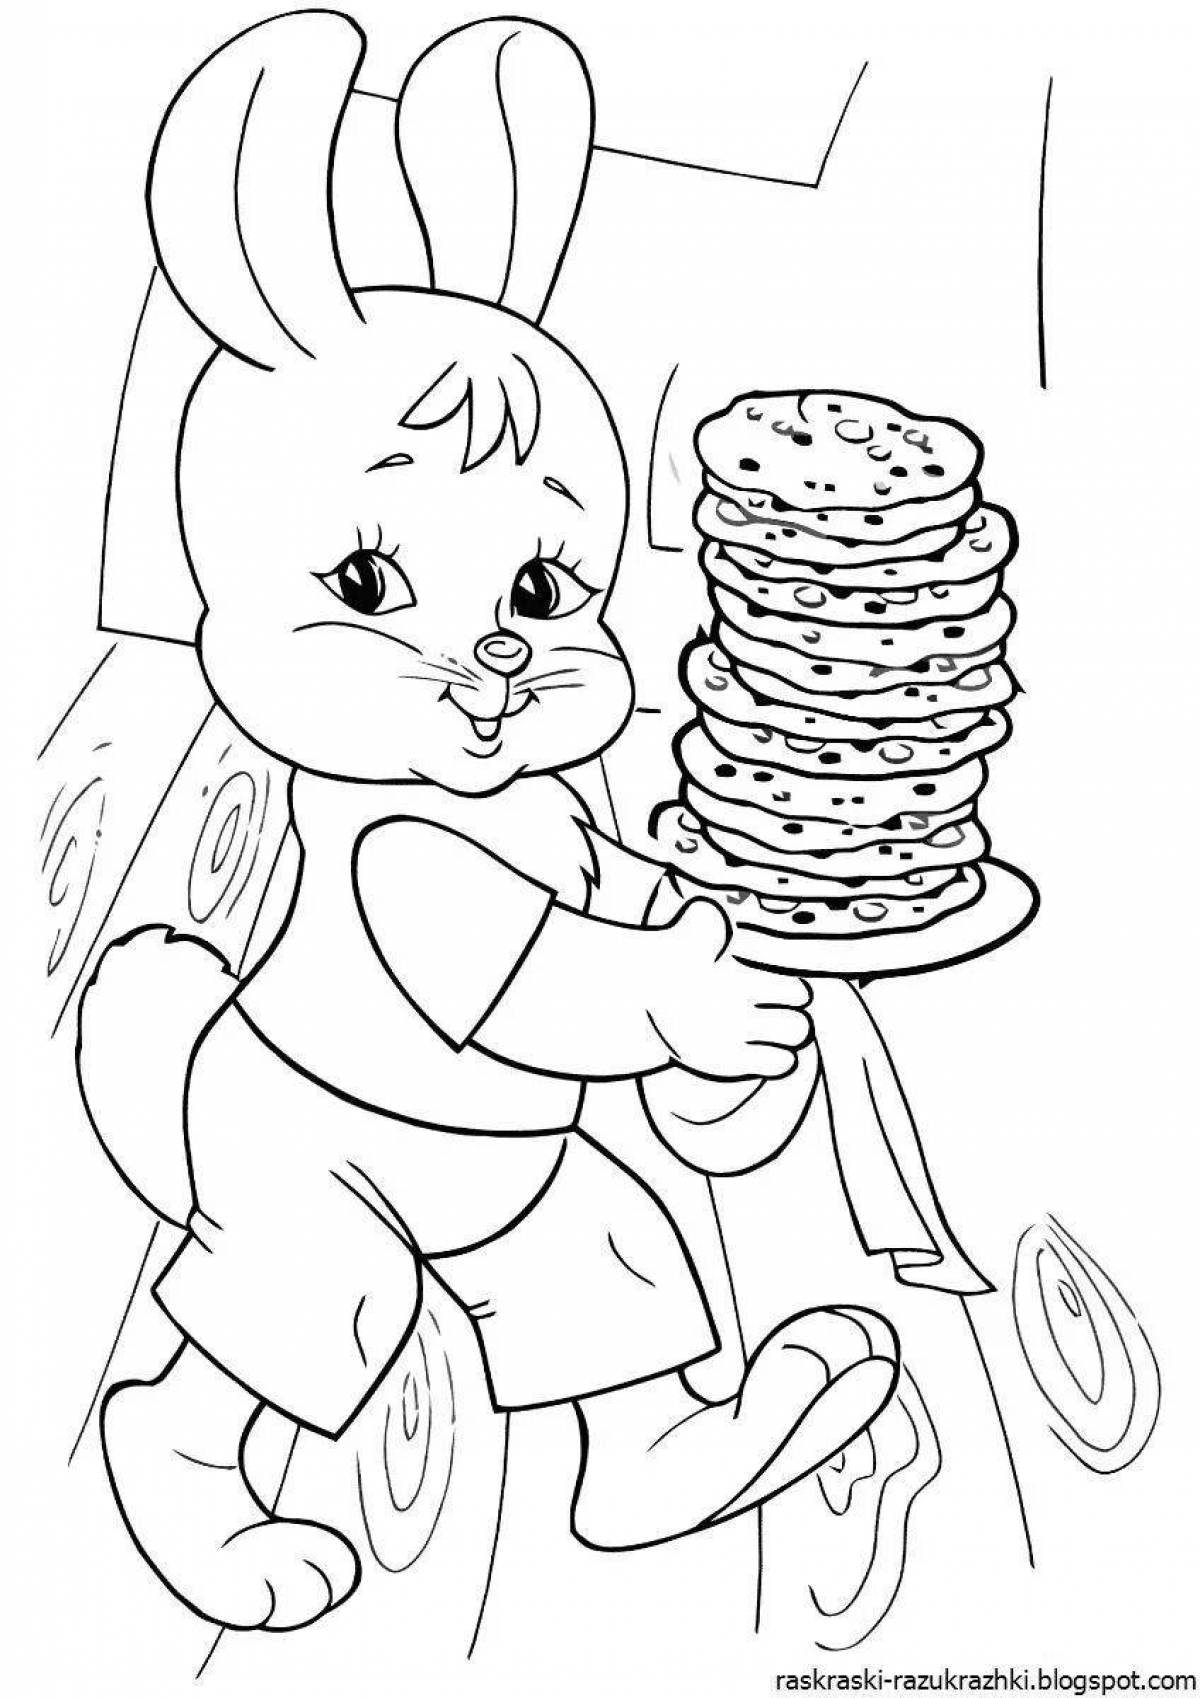 Adorable pancakes coloring book for kids